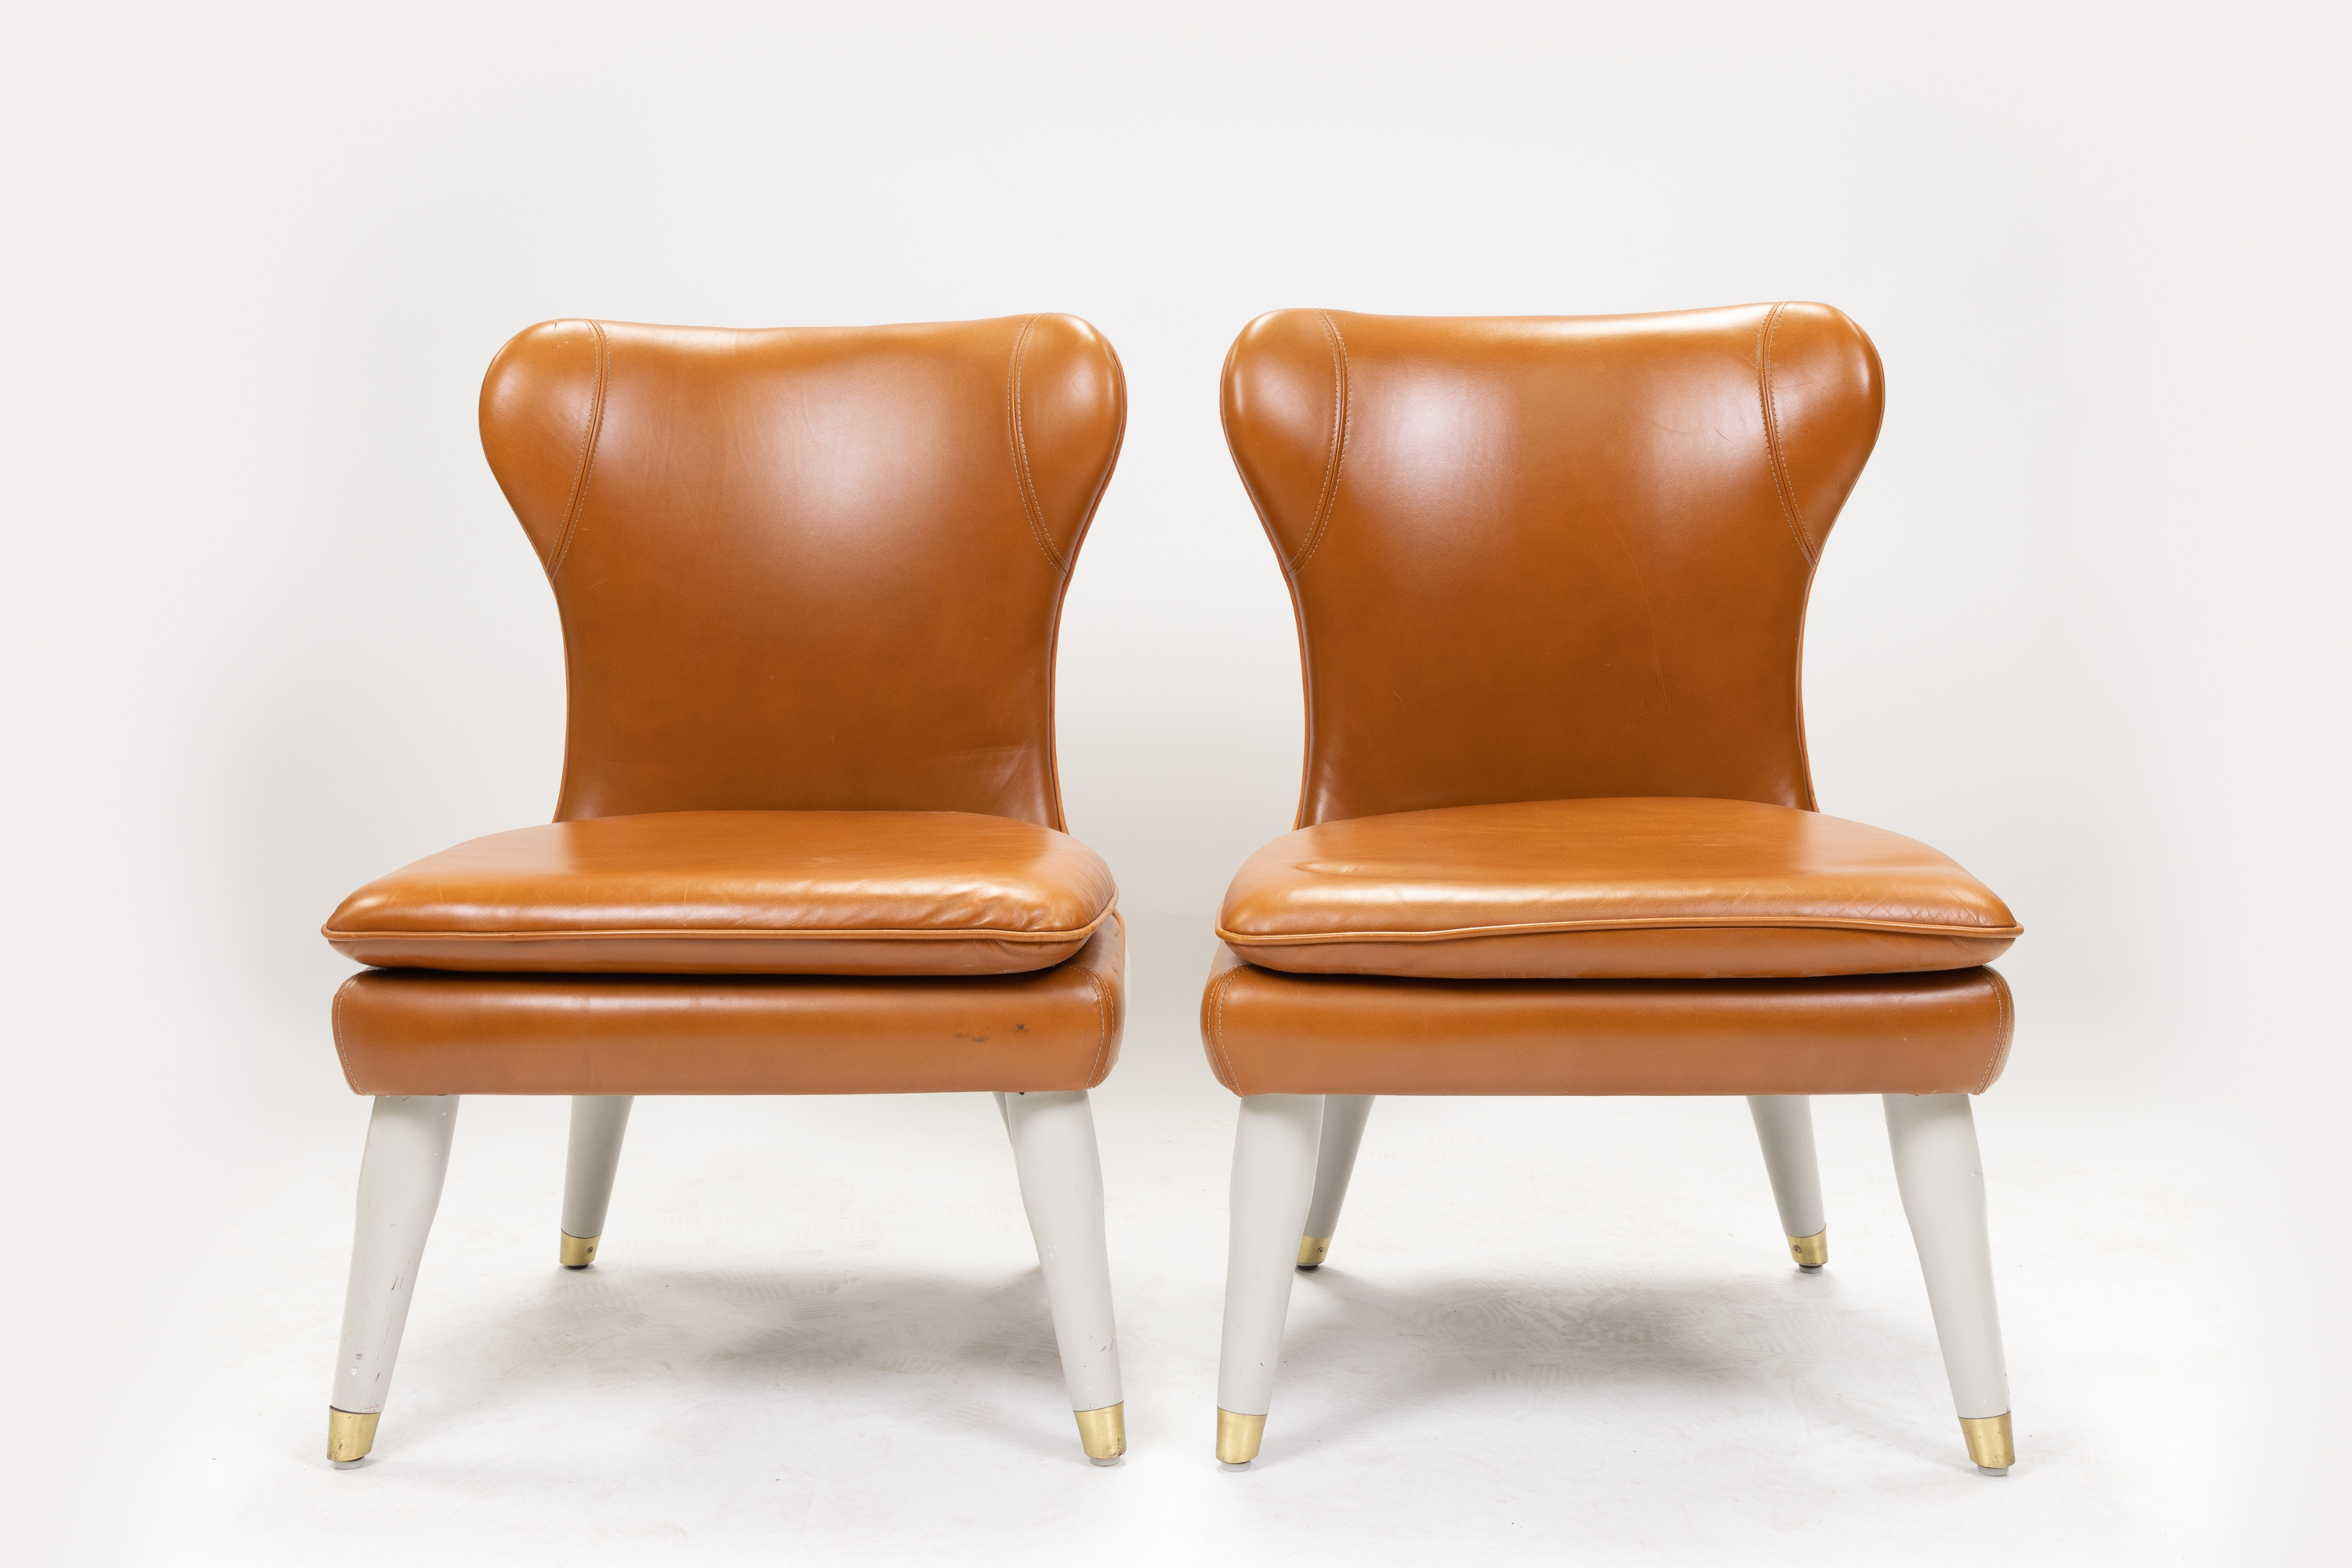 Pair of Ben Whistler Leather Chairs Designed for The Berkeley